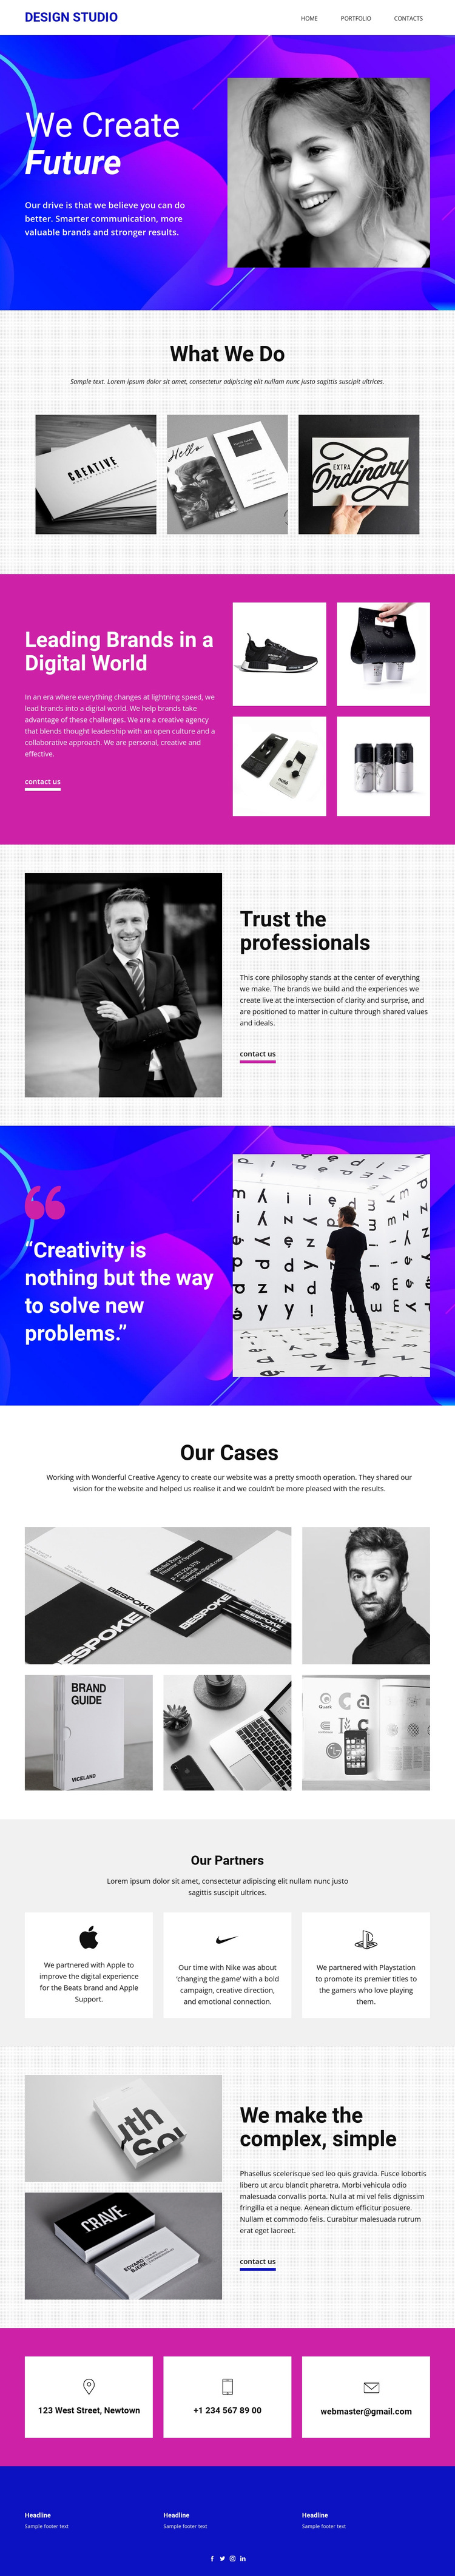 We develop the brand’s core HTML5 Template